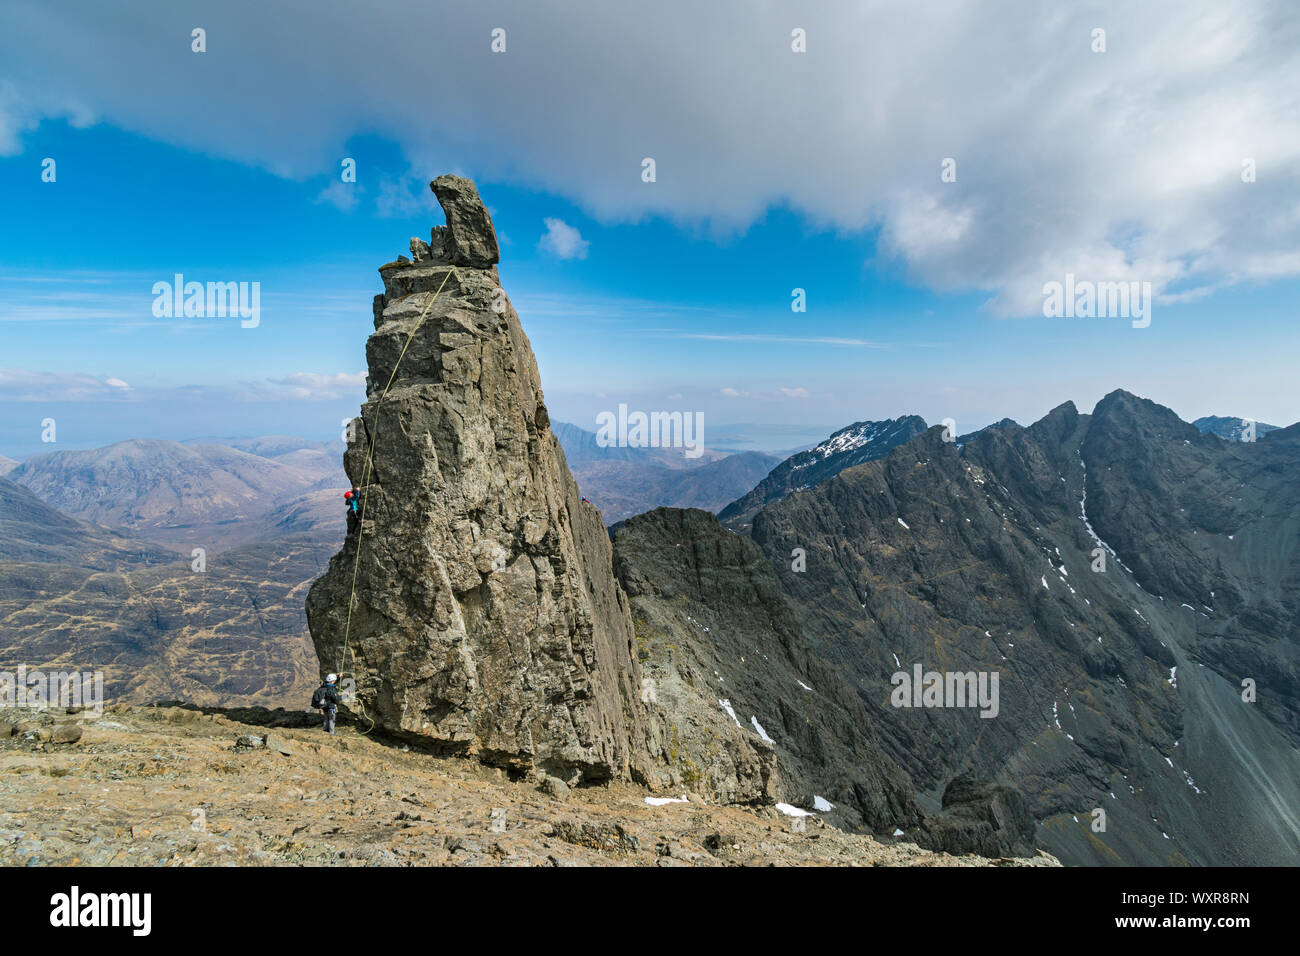 Climbers abseiling off the Inaccessible Pinnacle, at the summit of Sgurr Dearg, Cuillin mountains, Minginish, Isle of Skye, Scotland, UK Stock Photo